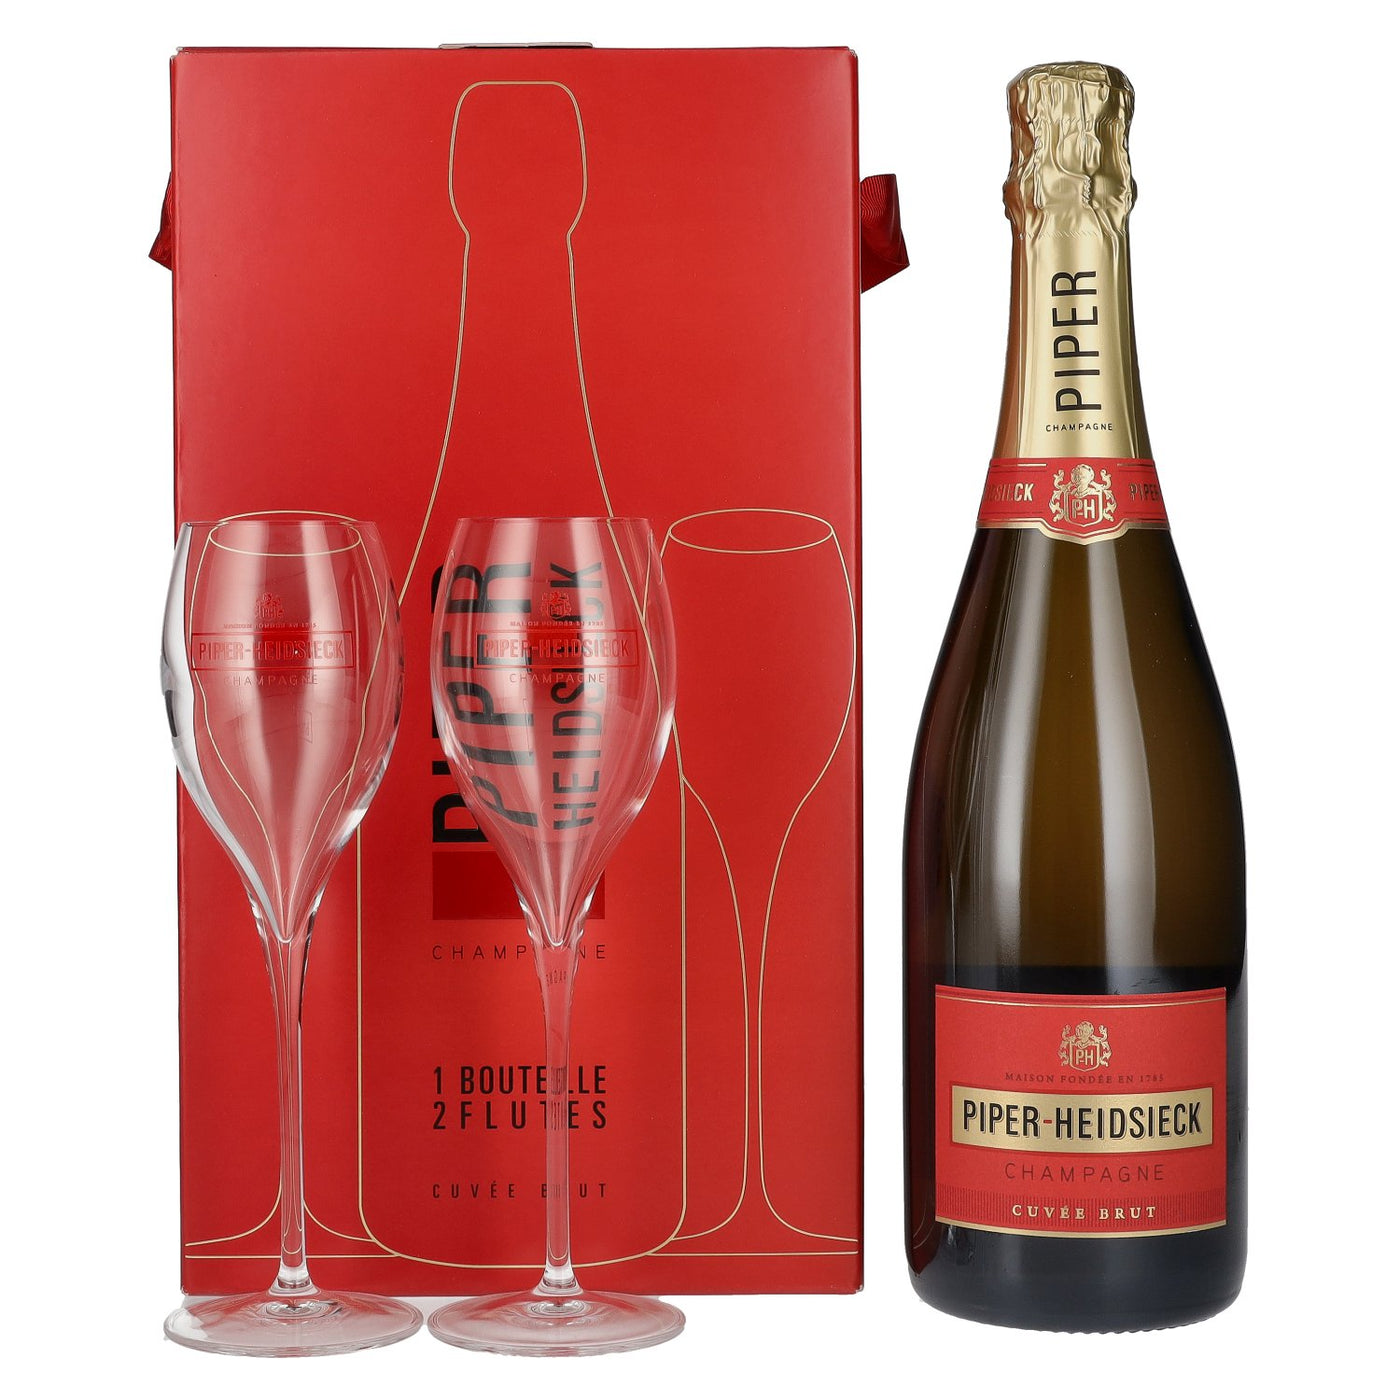 BUY] Piper-Heidsieck | Cuvee Brut at Glasses with NV 